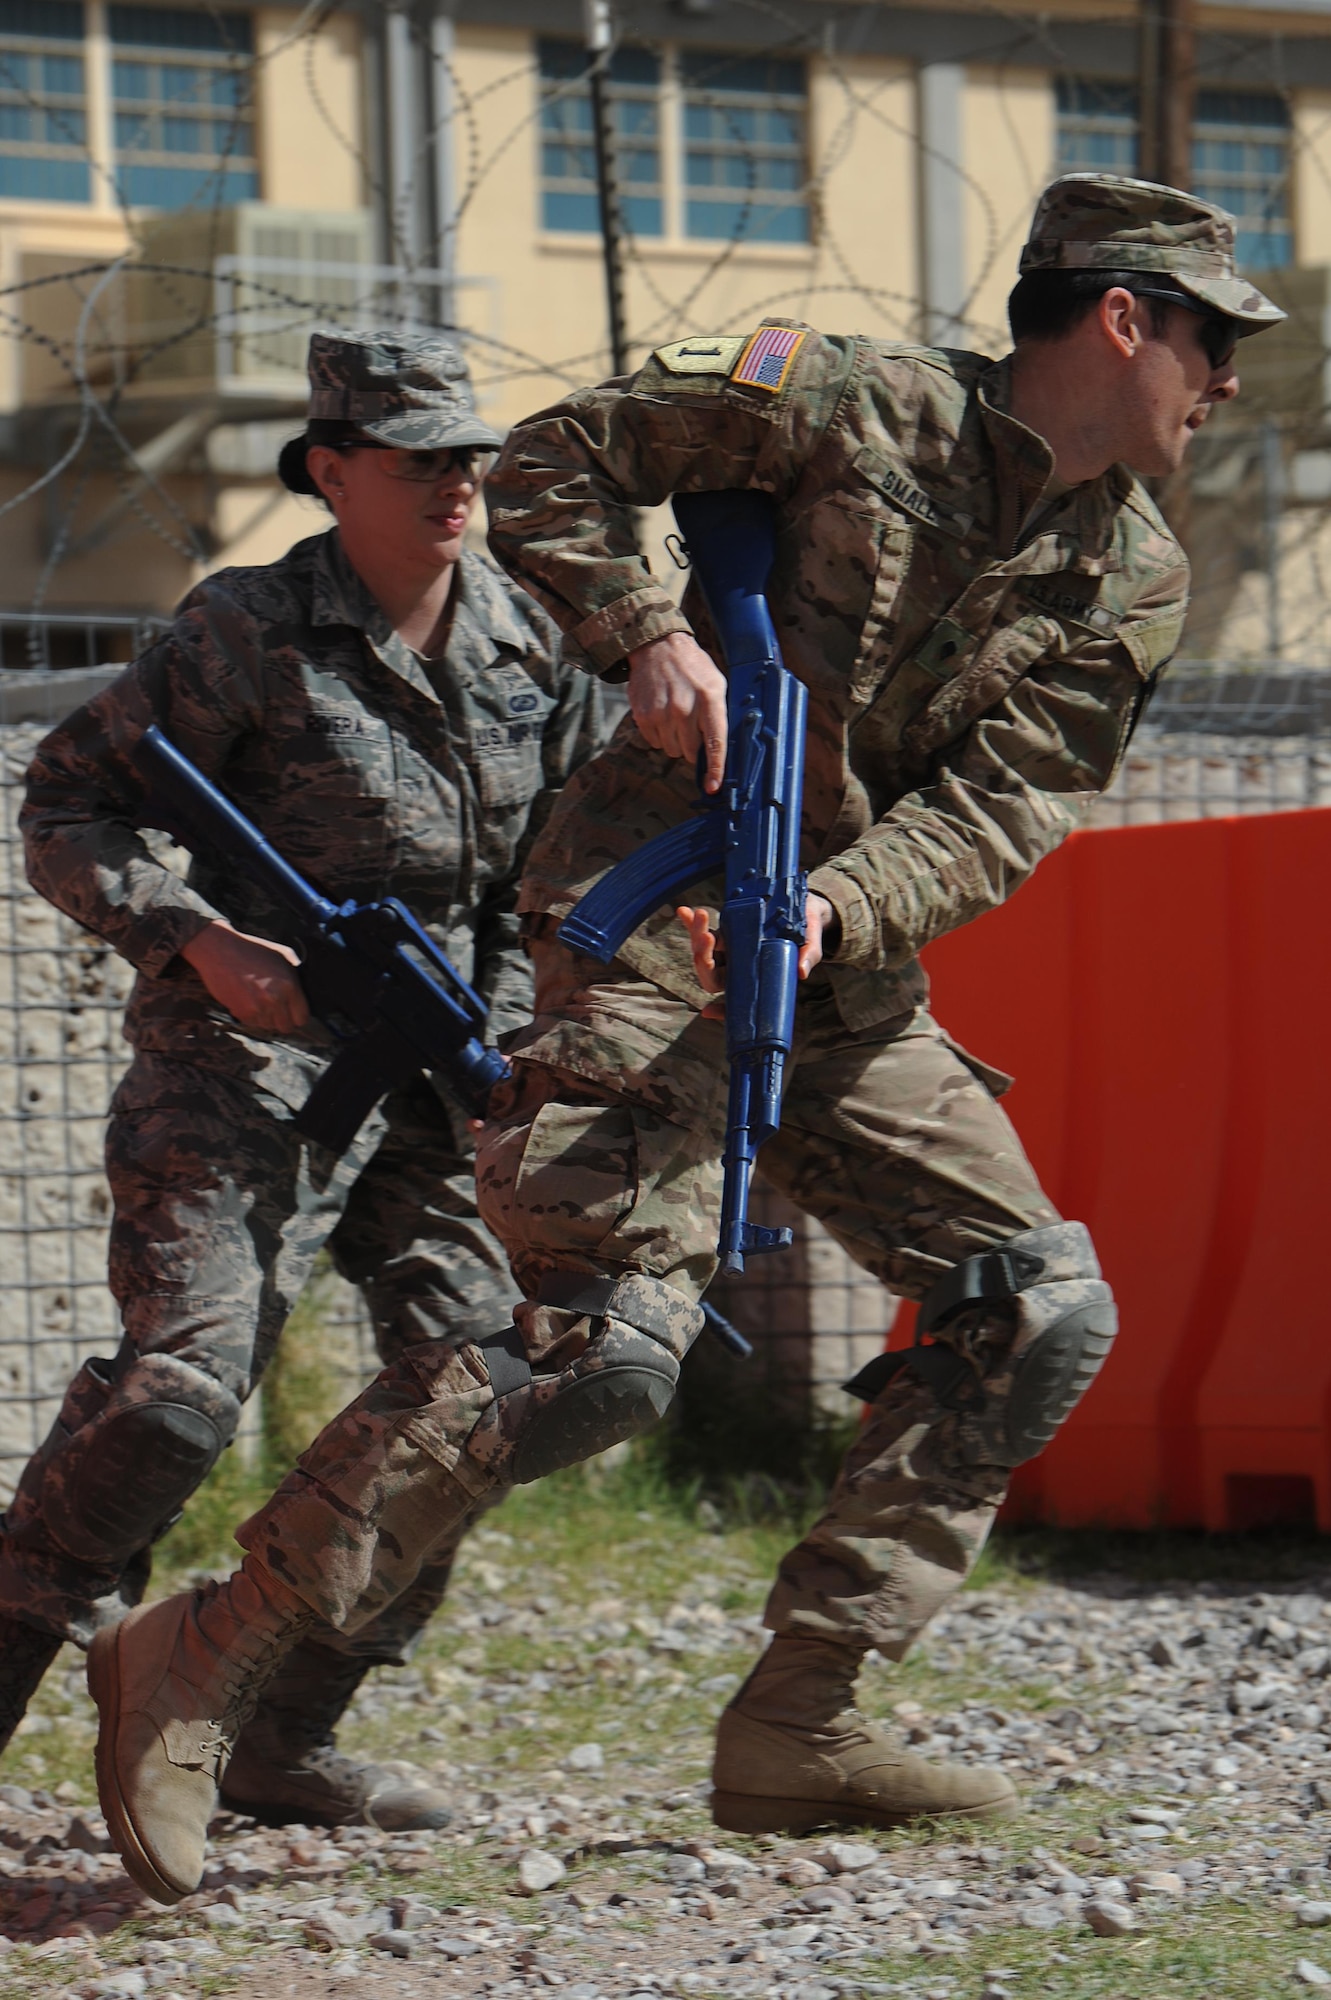 Participants of the Operational Contract Support Joint Exercise 2016 practice a tactical withdrawl during the tactical combat casualty care training, March 24, 2016, at Fort Bliss, Texas. OCSJX-16 provides training across the spectrum of OCS readiness from requirements and development of warfighter staff integration and synchronization through contract execution supporting the joint force commander. (U.S. Air Force Photo by Tech. Sgt. Chad Chisholm/Released)